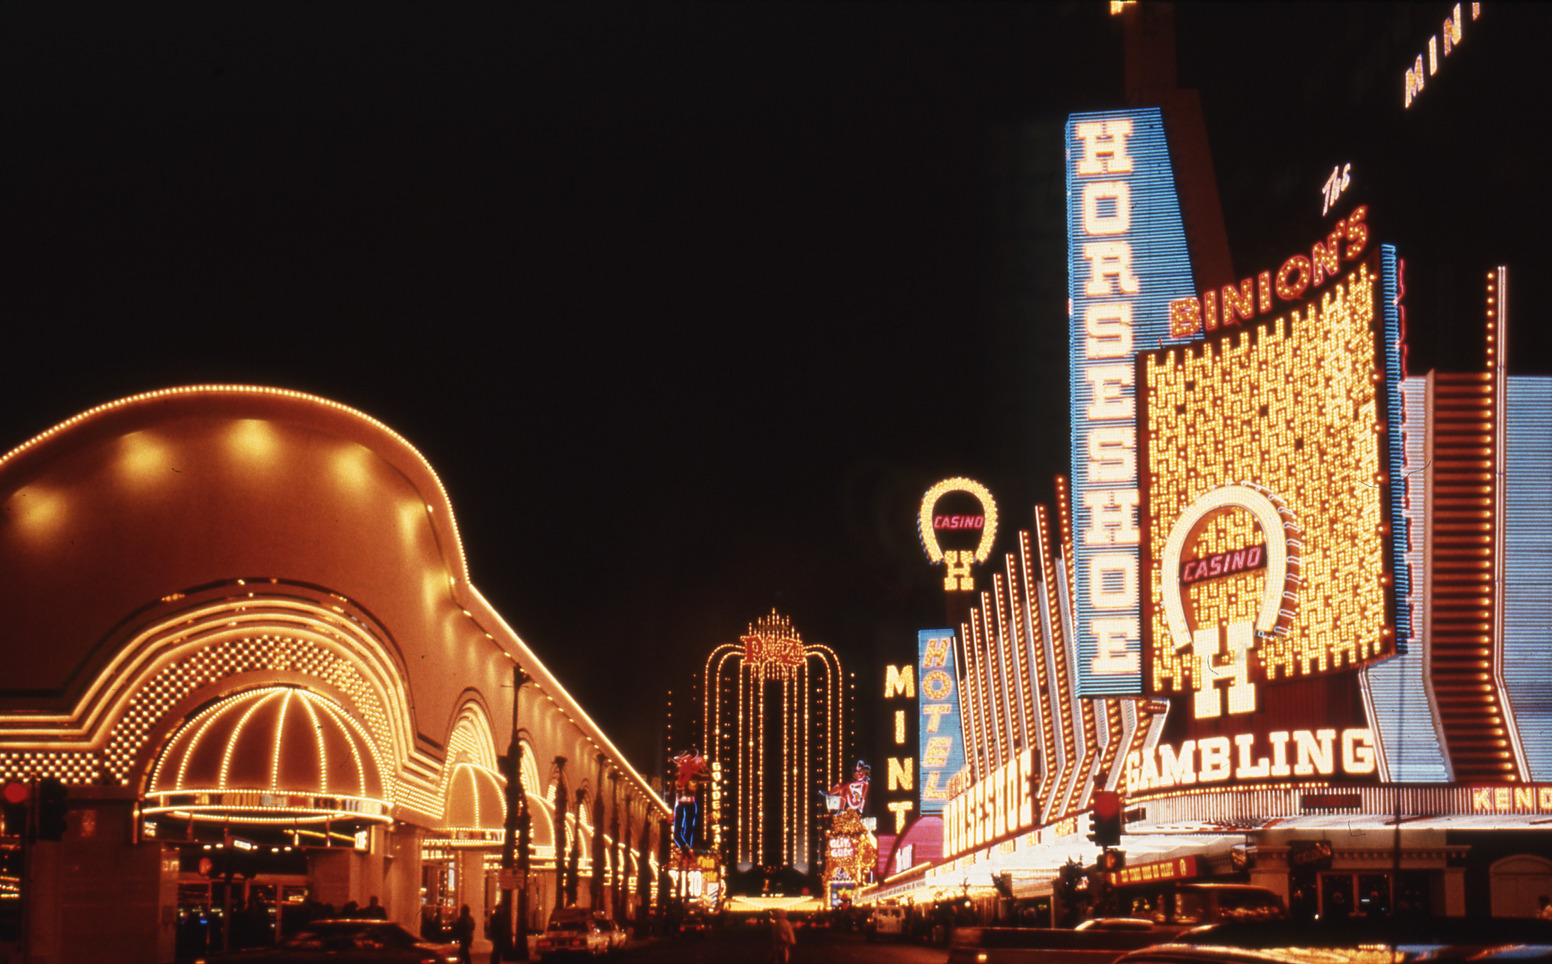 The Nugget, Horseshoe, and Mint wall signs, Las Vegas, Nevada: photographic print